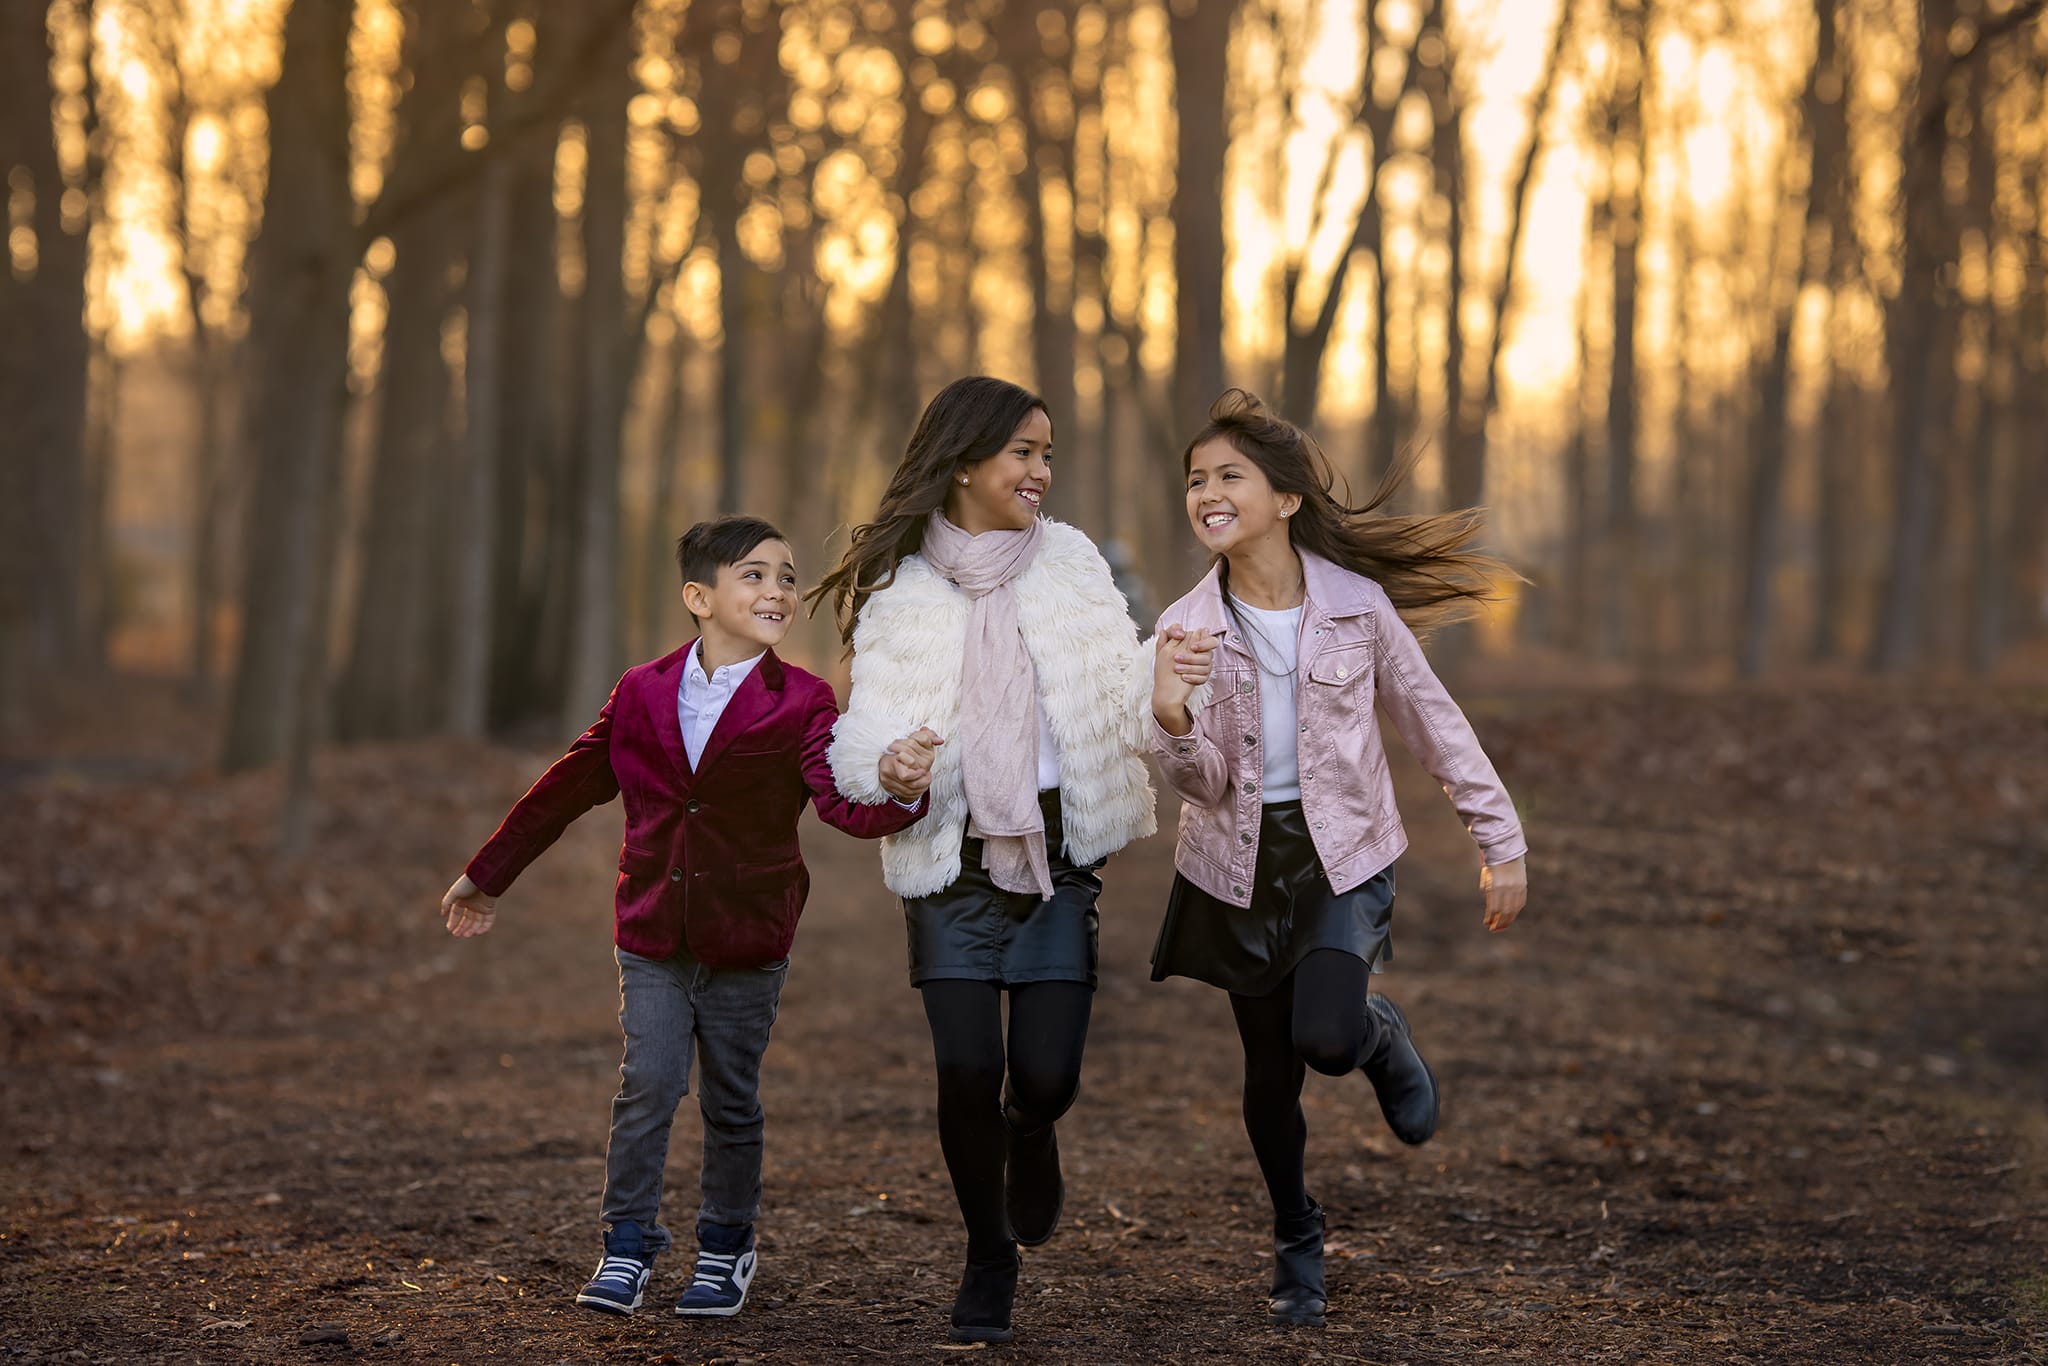 Michigan photographer's photo of three siblings in woods